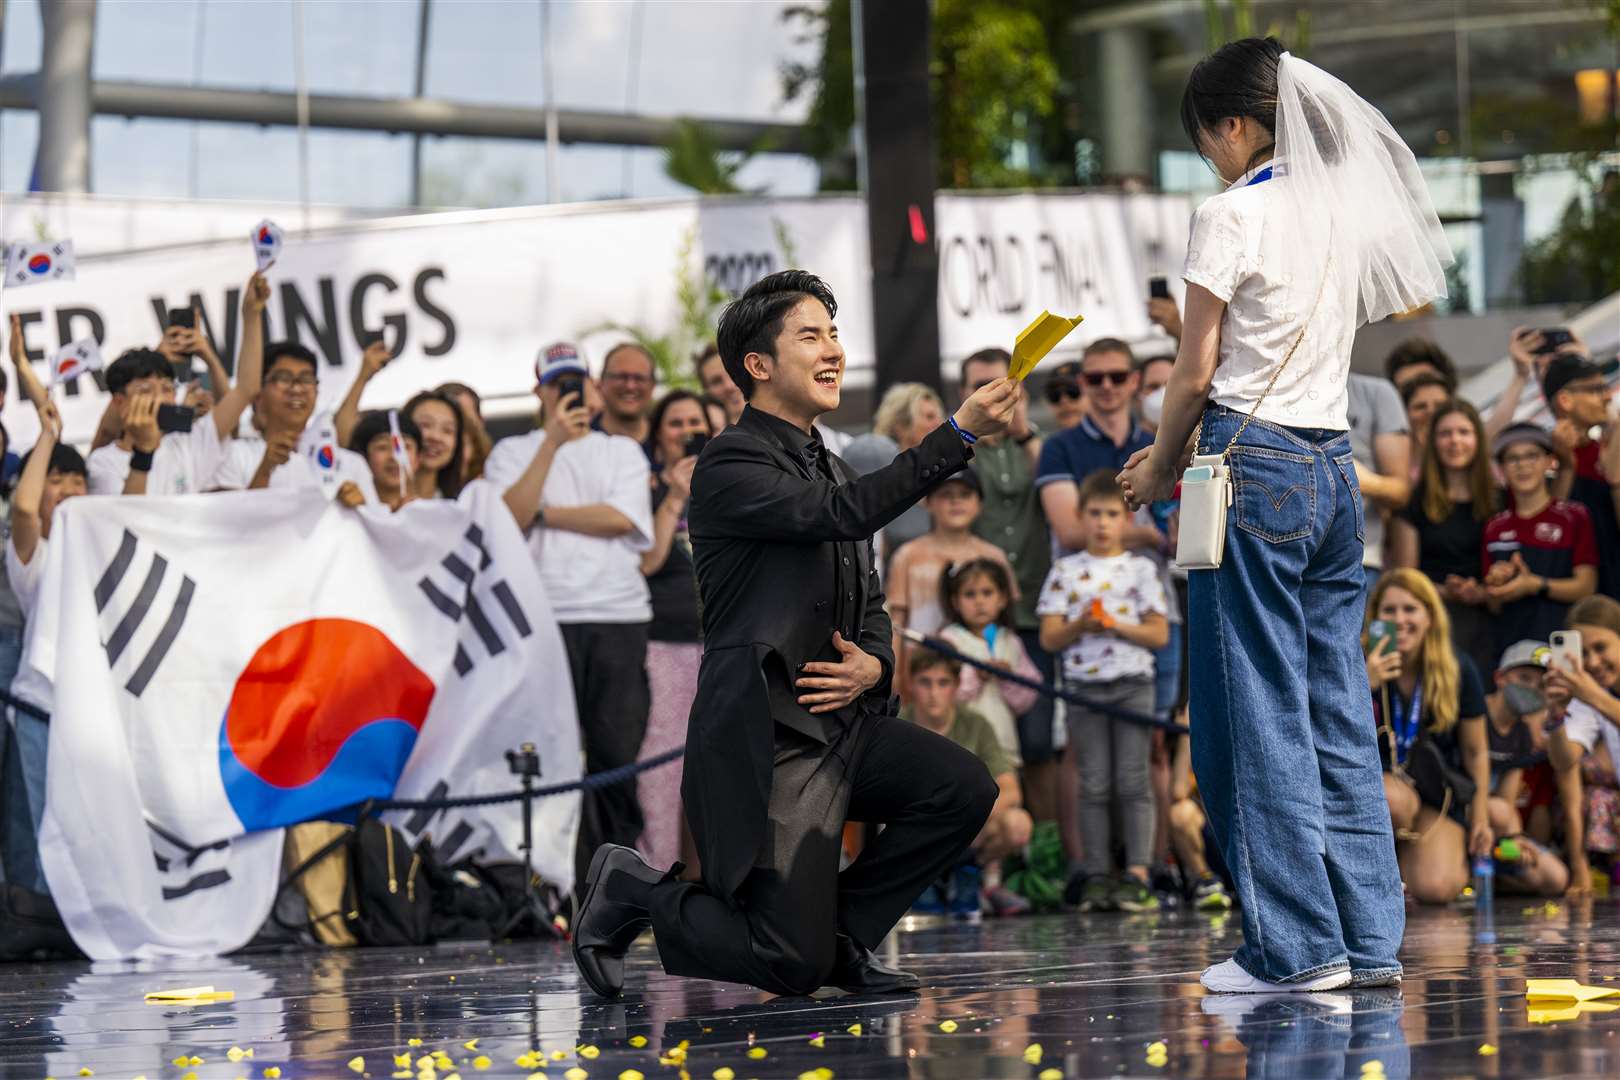 Aerobatics winner Seunghoon Lee, from South Korea, proposed to his girlfriend after being crowned the champion (Red Bull Paper Wings)